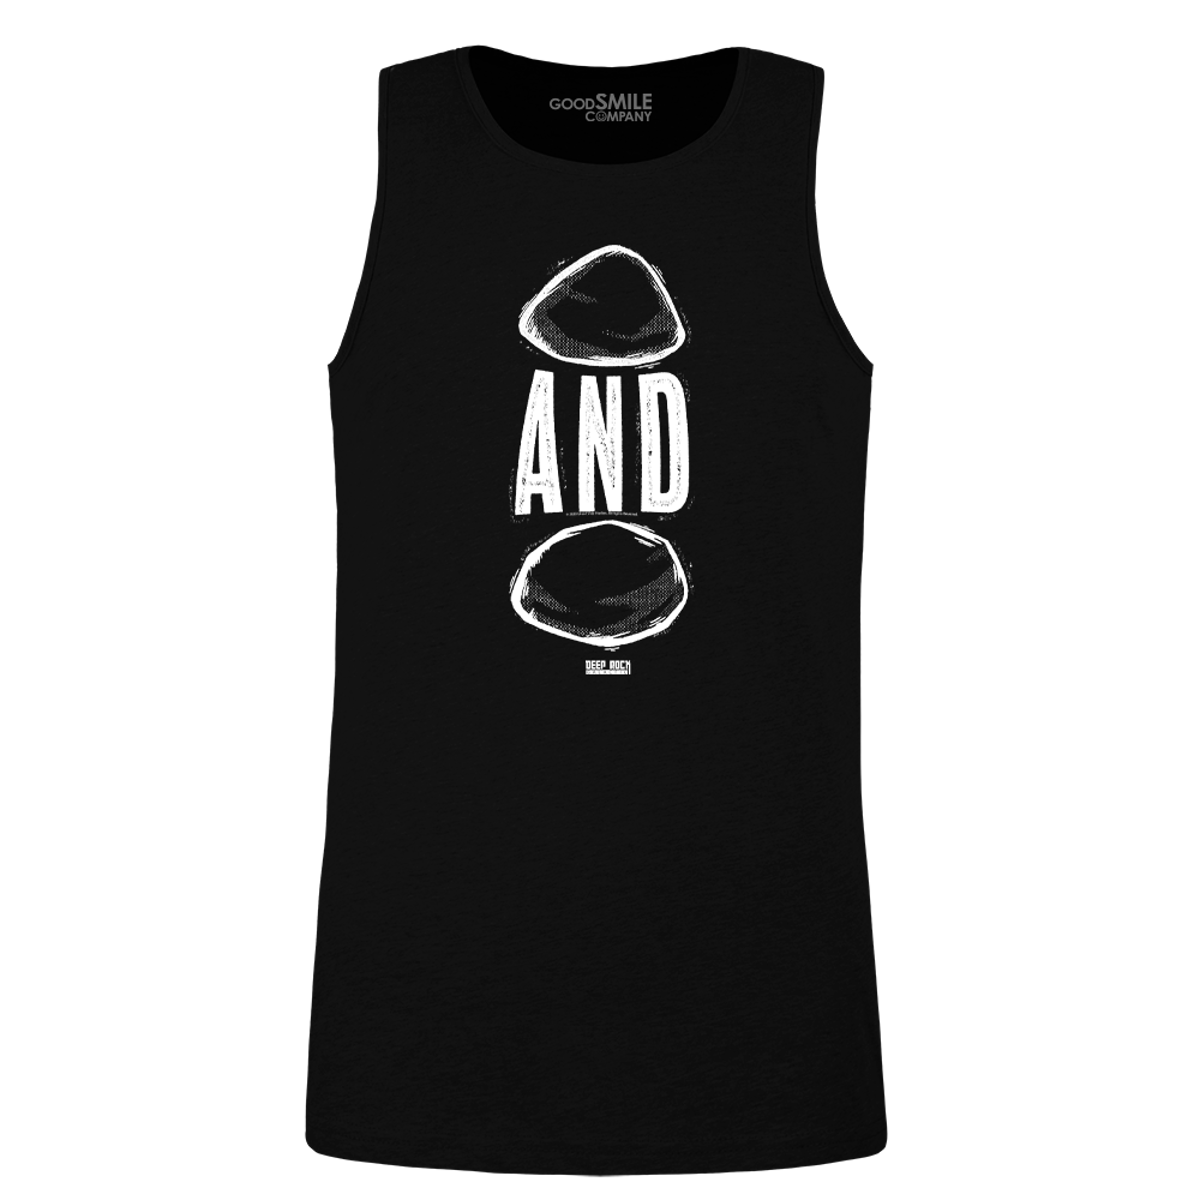 Rock and Stone Men's Tank Top